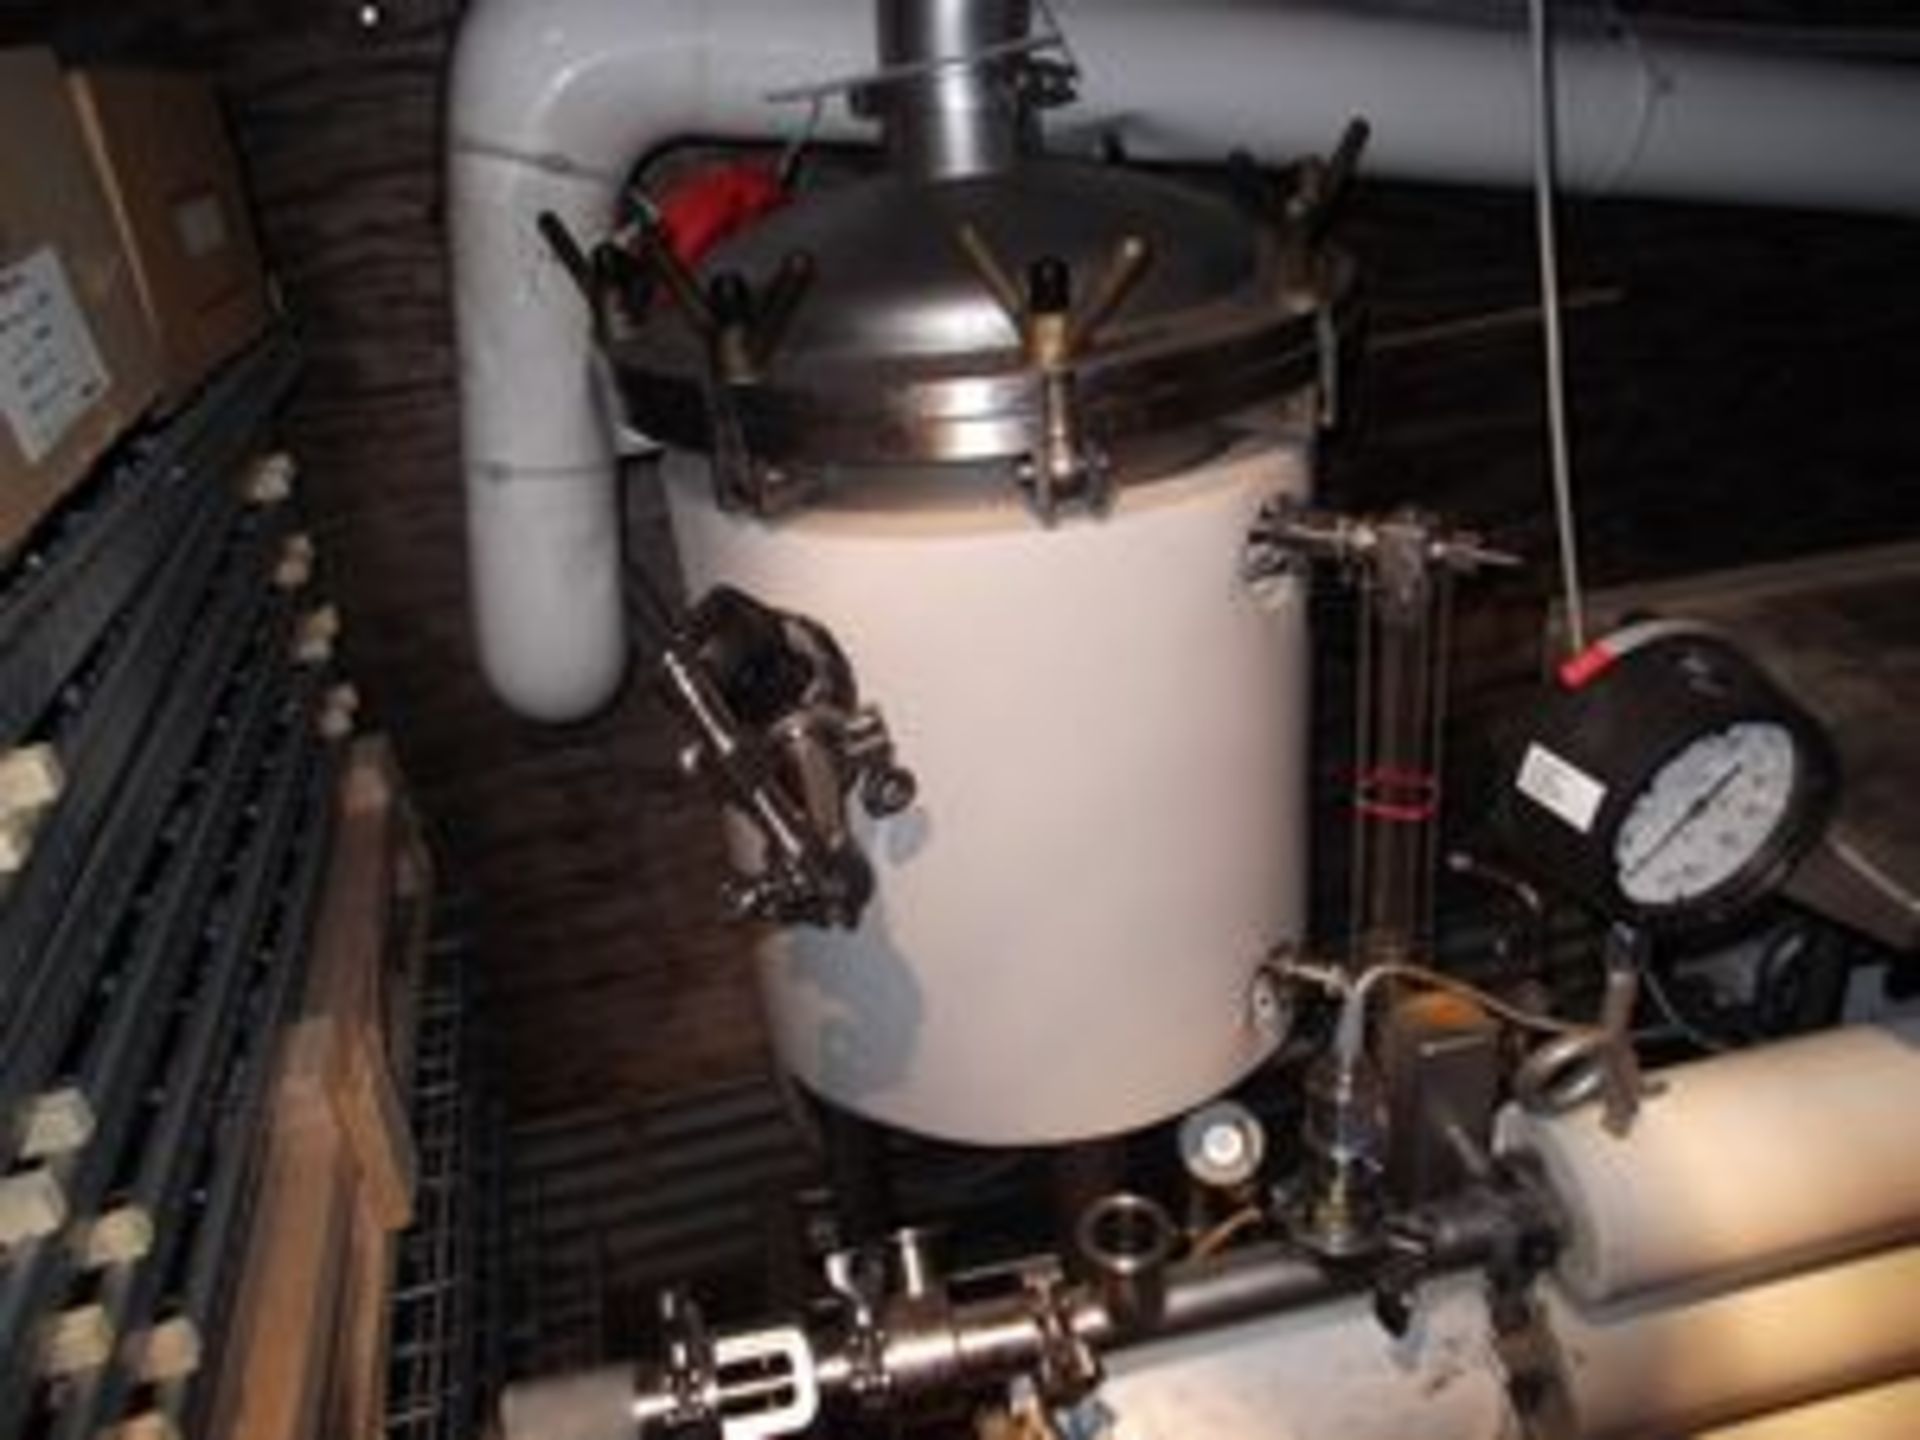 DSI UHT Skid, Model DSI/Flash, Direct Steam Injection and Vacuum Cooling, Skid Mounted with Pressure - Image 5 of 6